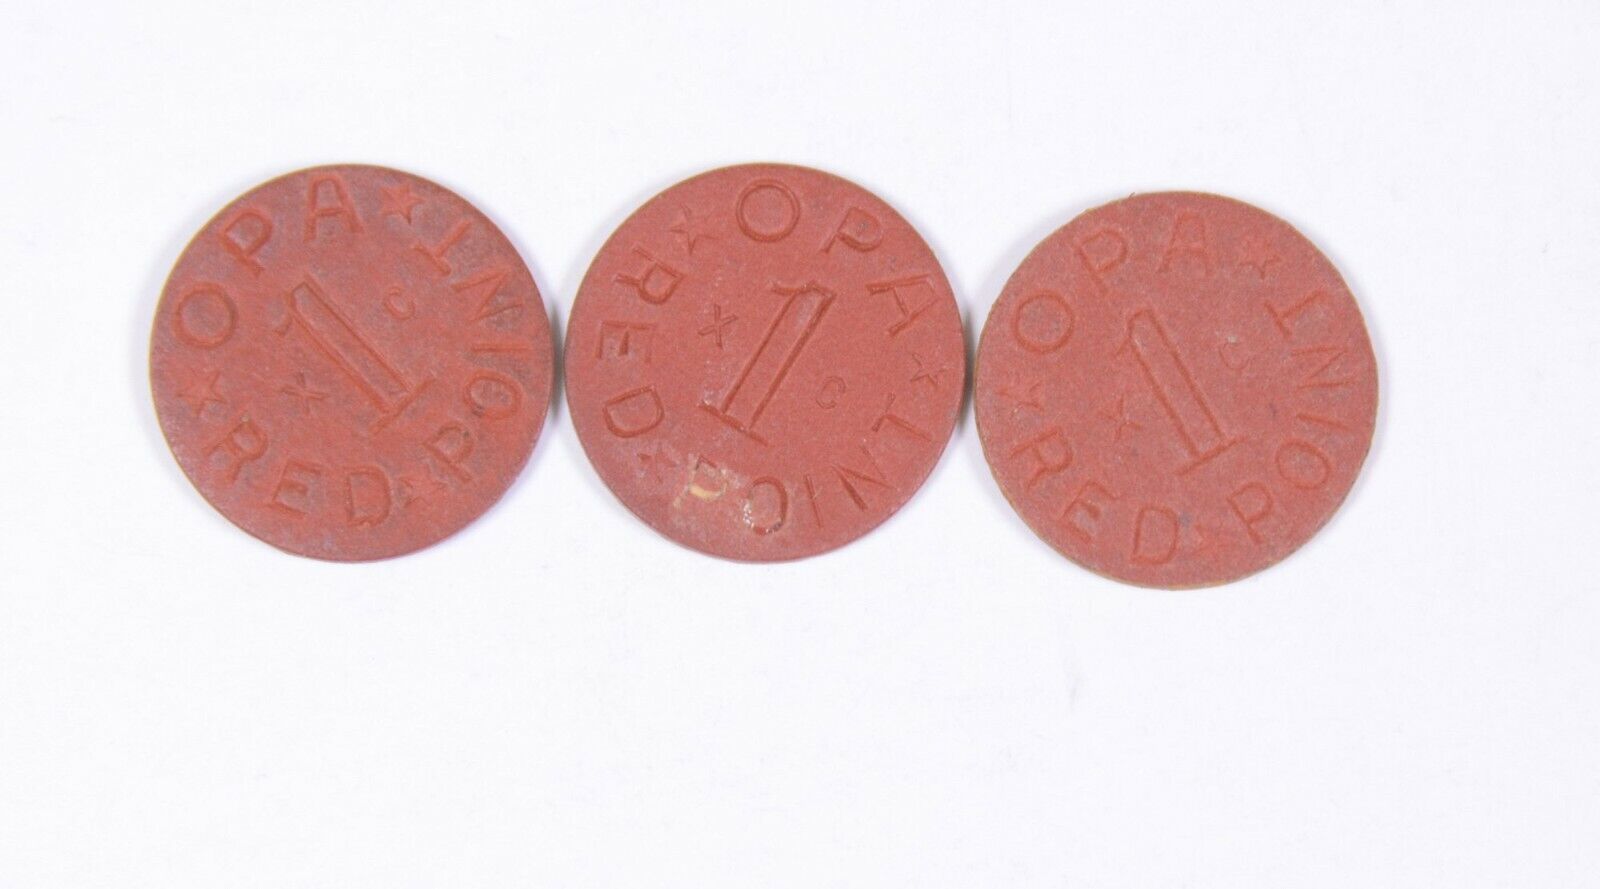 Lot of (3) Vintage WWII ERA  Red OPA Tax Tokens Marked XC  issued 1942 to 1945  Без бренда - фотография #3